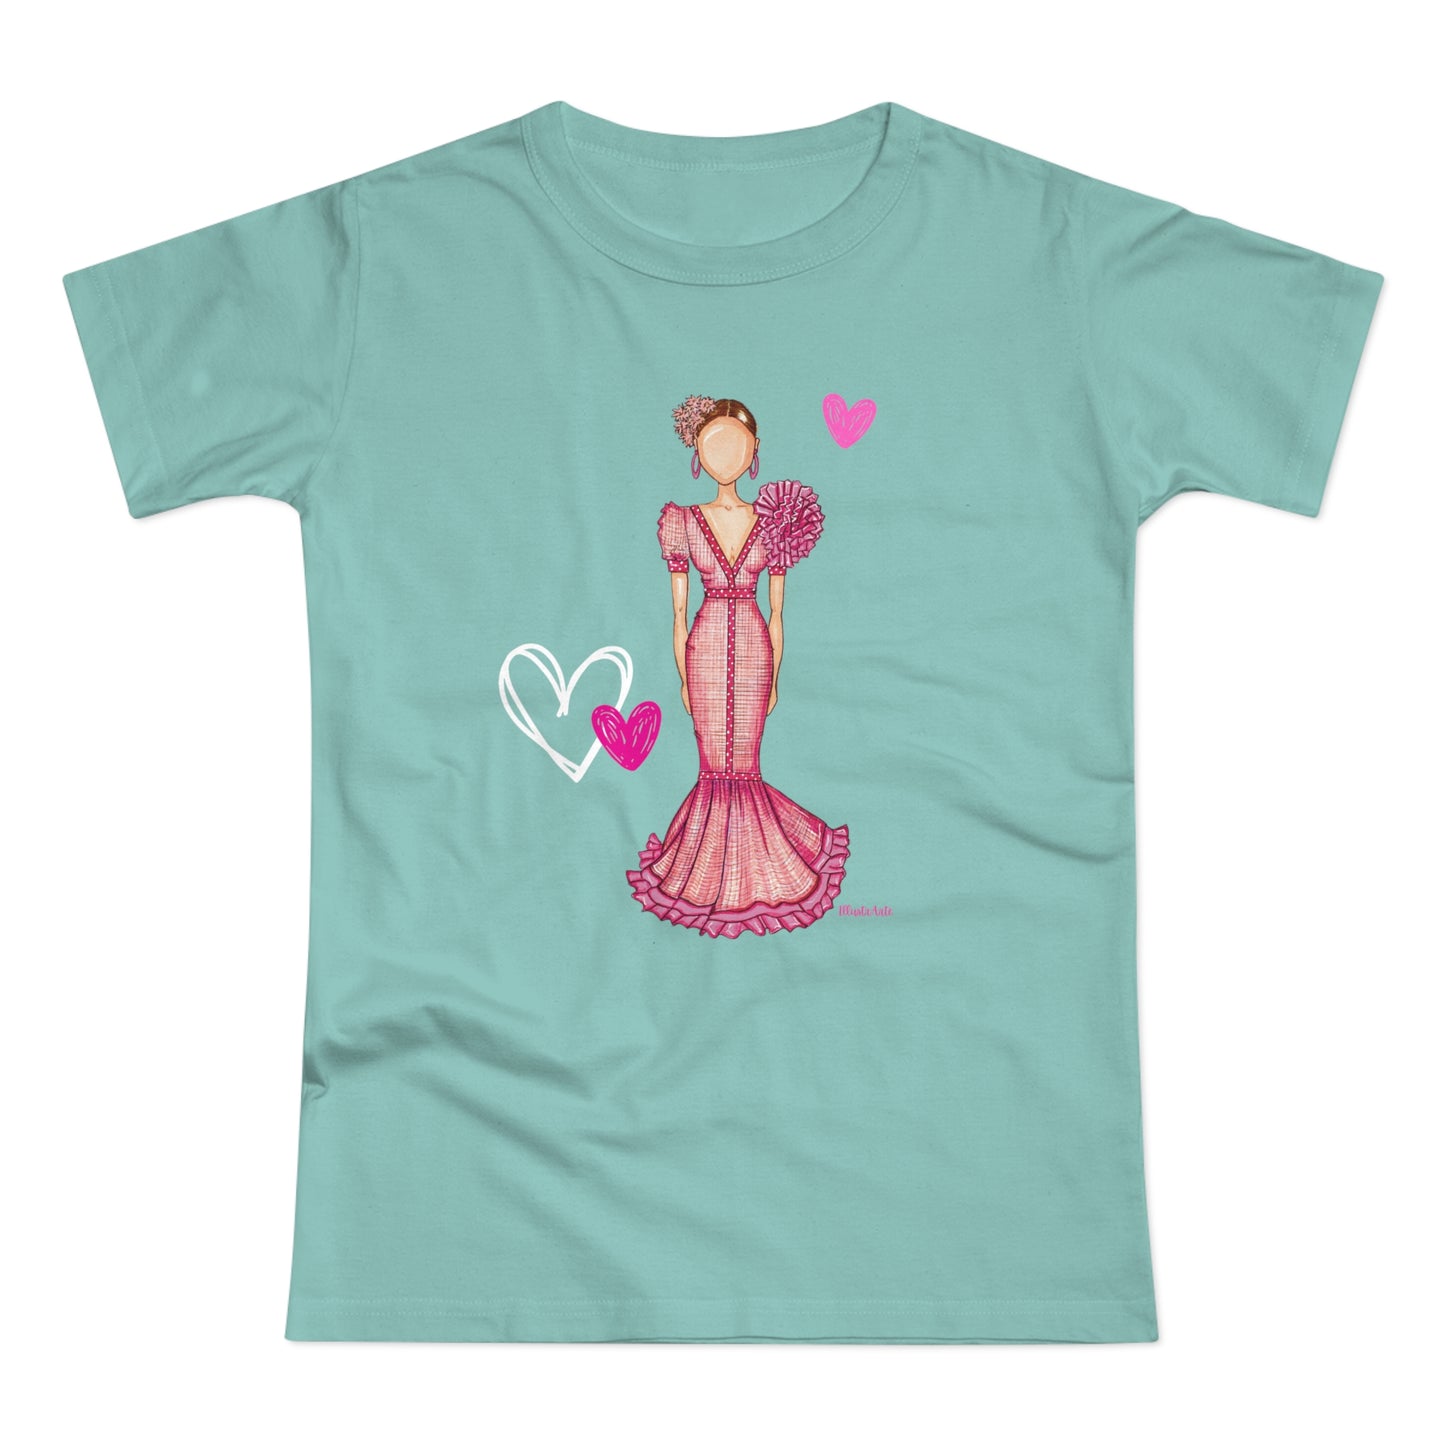 a t - shirt with a woman in a pink dress and a heart